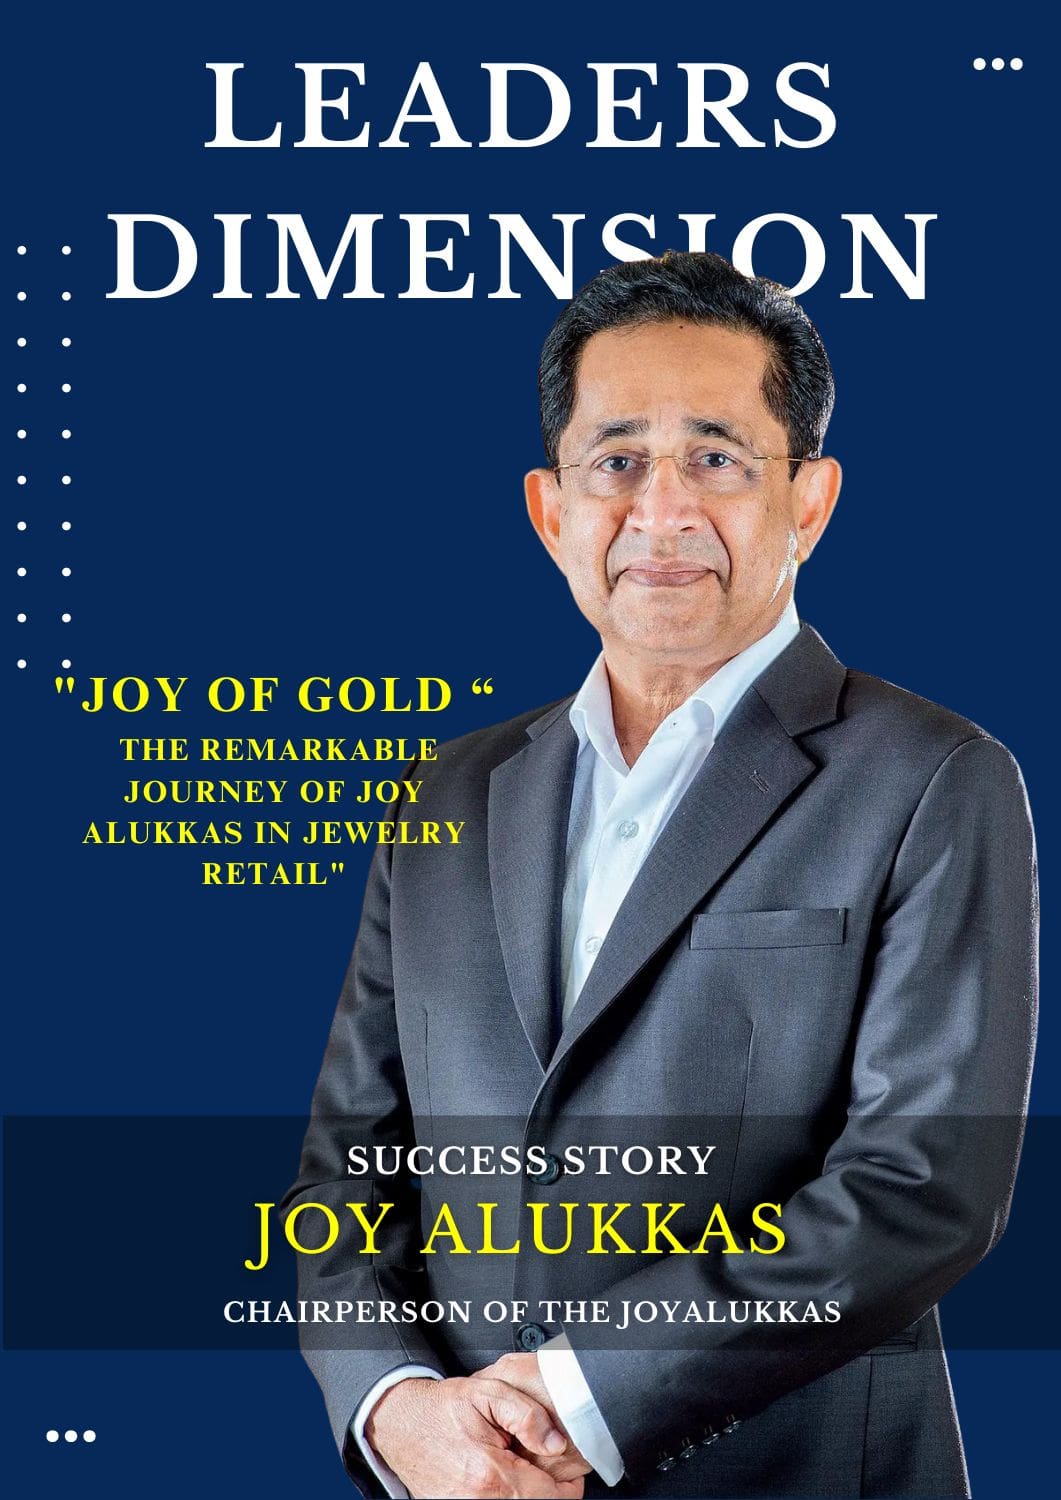 Joy of Gold “  The Remarkable Journey of Joy Alukkas in Jewelry Retail